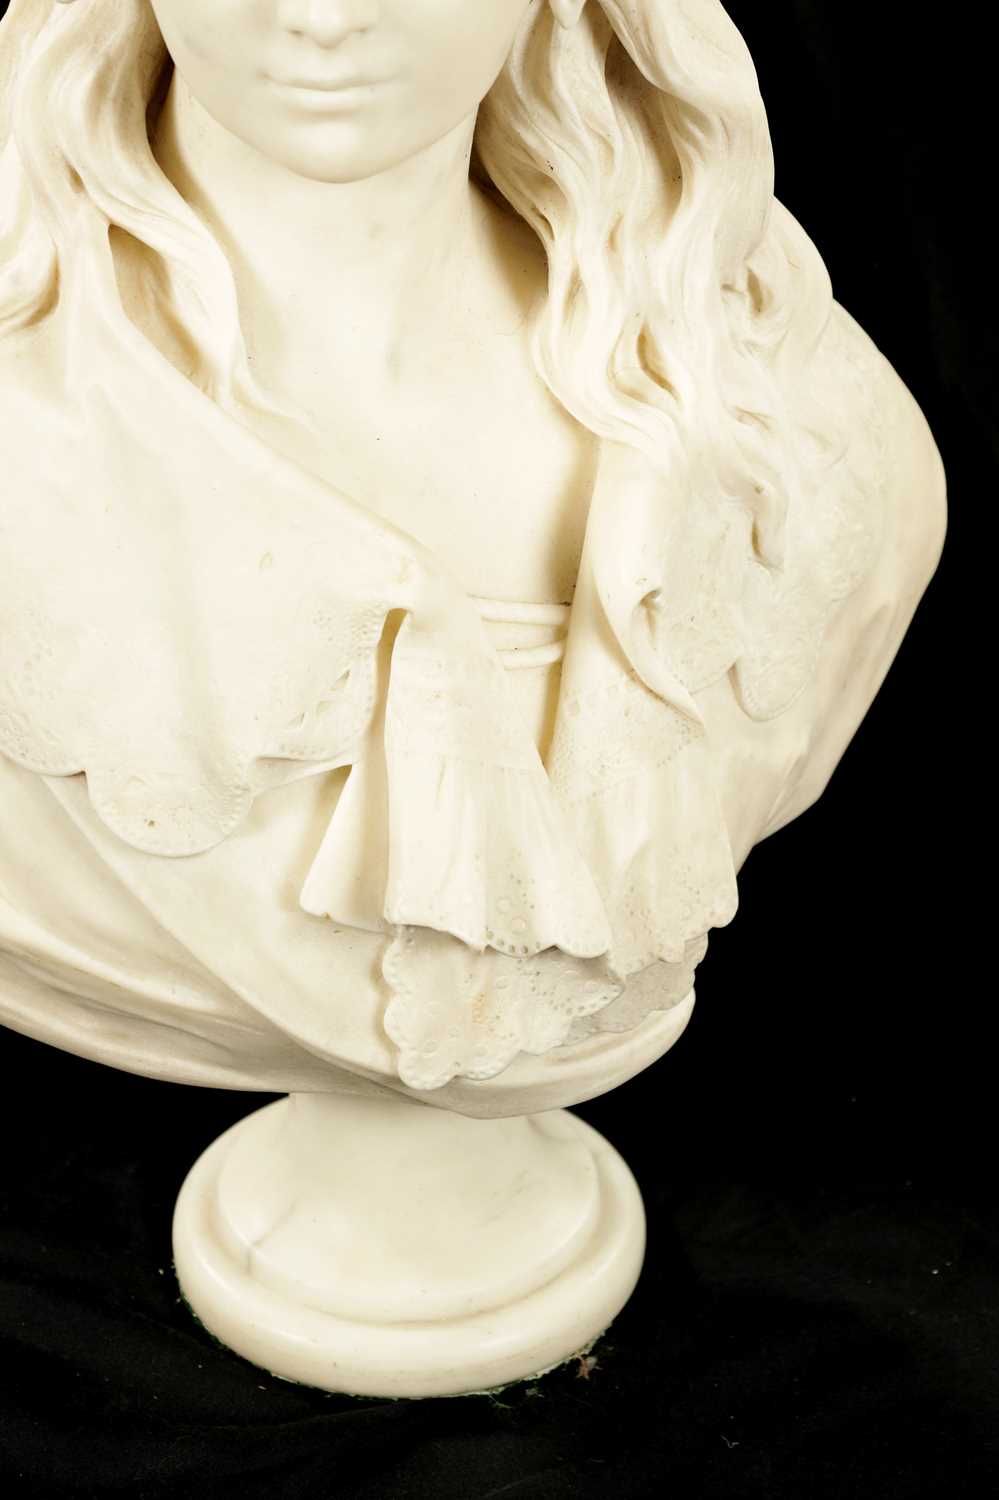 JACQUES BOERO. A 19TH CENTURY CARVED CARRERA MARBLE ITALIAN BUST - Image 3 of 5